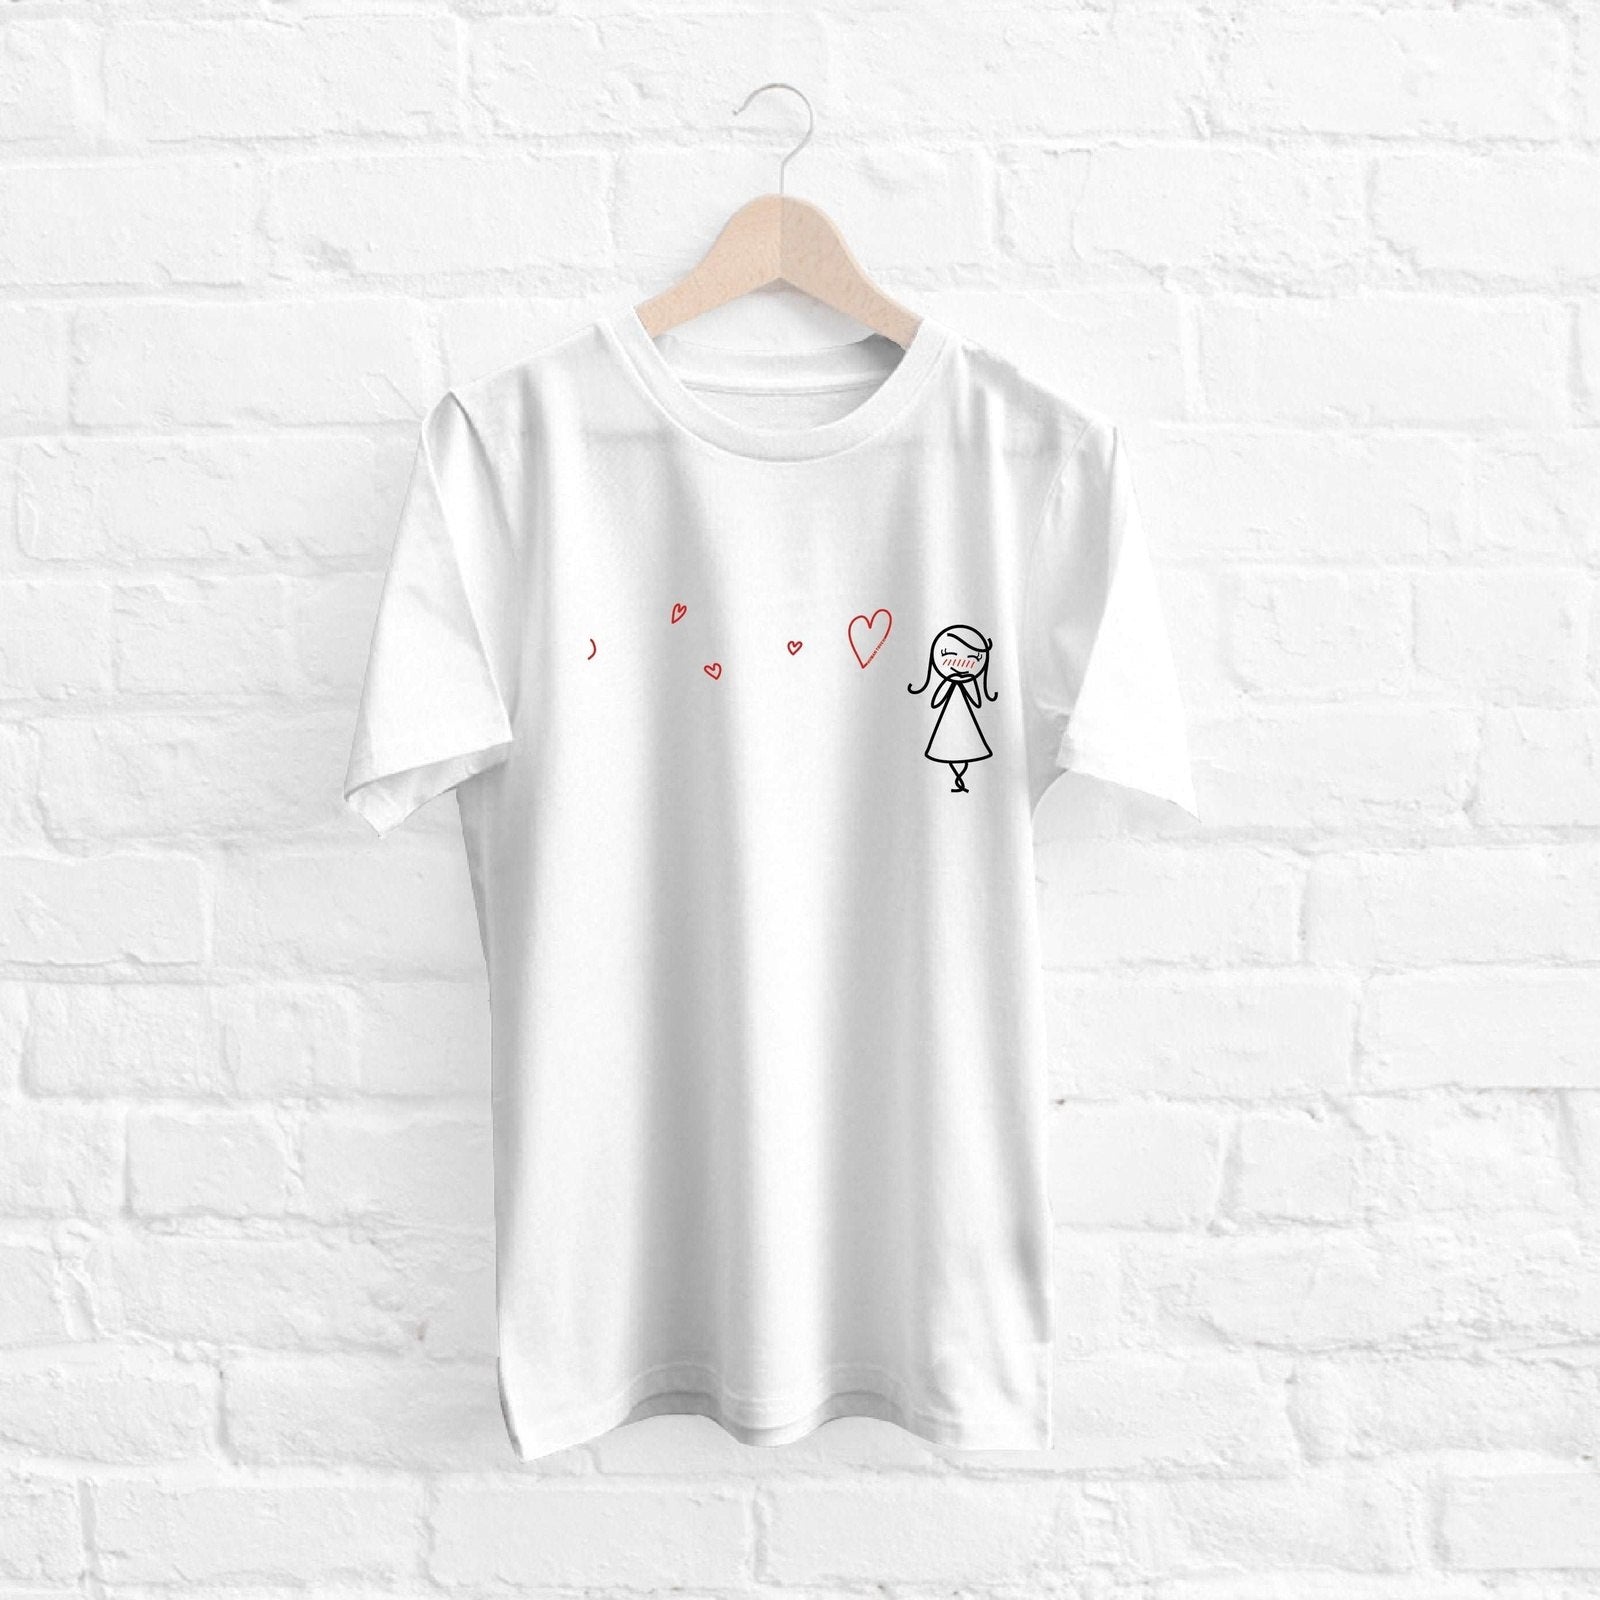 How about this: A stylish white tee featuring a charming hand-drawn illustration, perfect for couples and anniversary gifts!